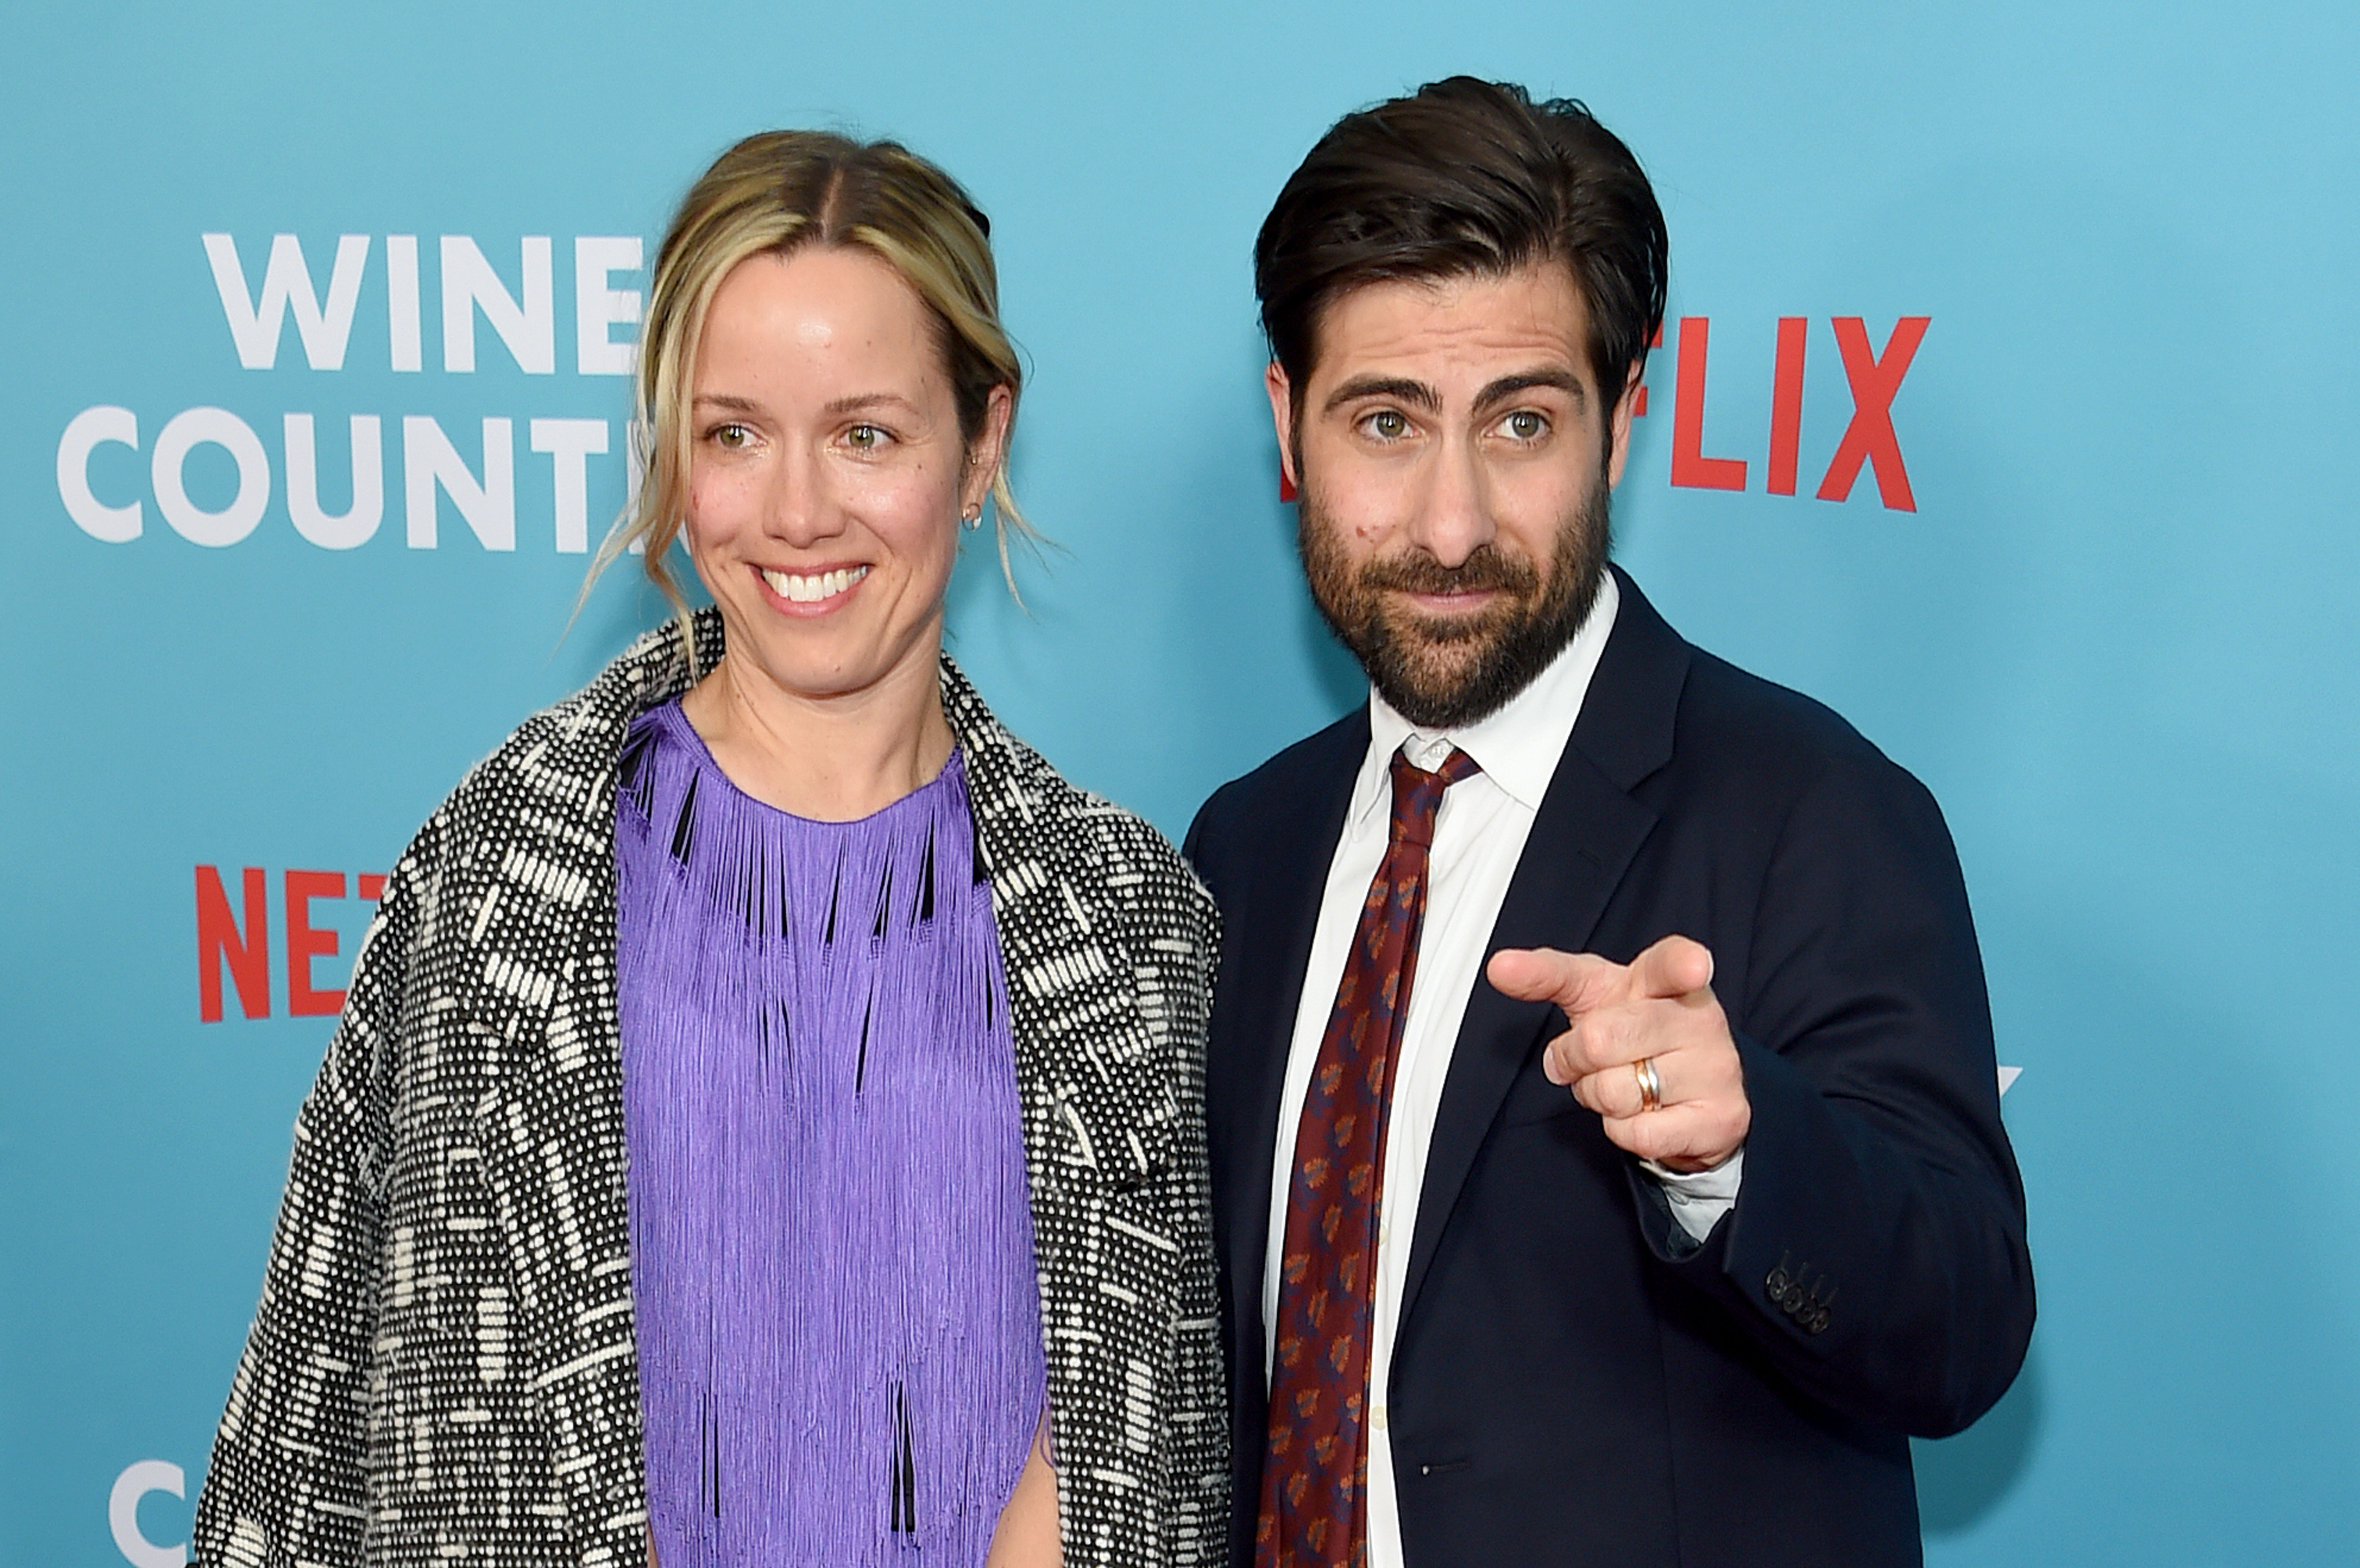 Brady Cunningham and Jason Schwartzman attend the "Wine Country" world premiere at Paris Theatre, on May 8, 2019, in New York City. | Source: Getty Images